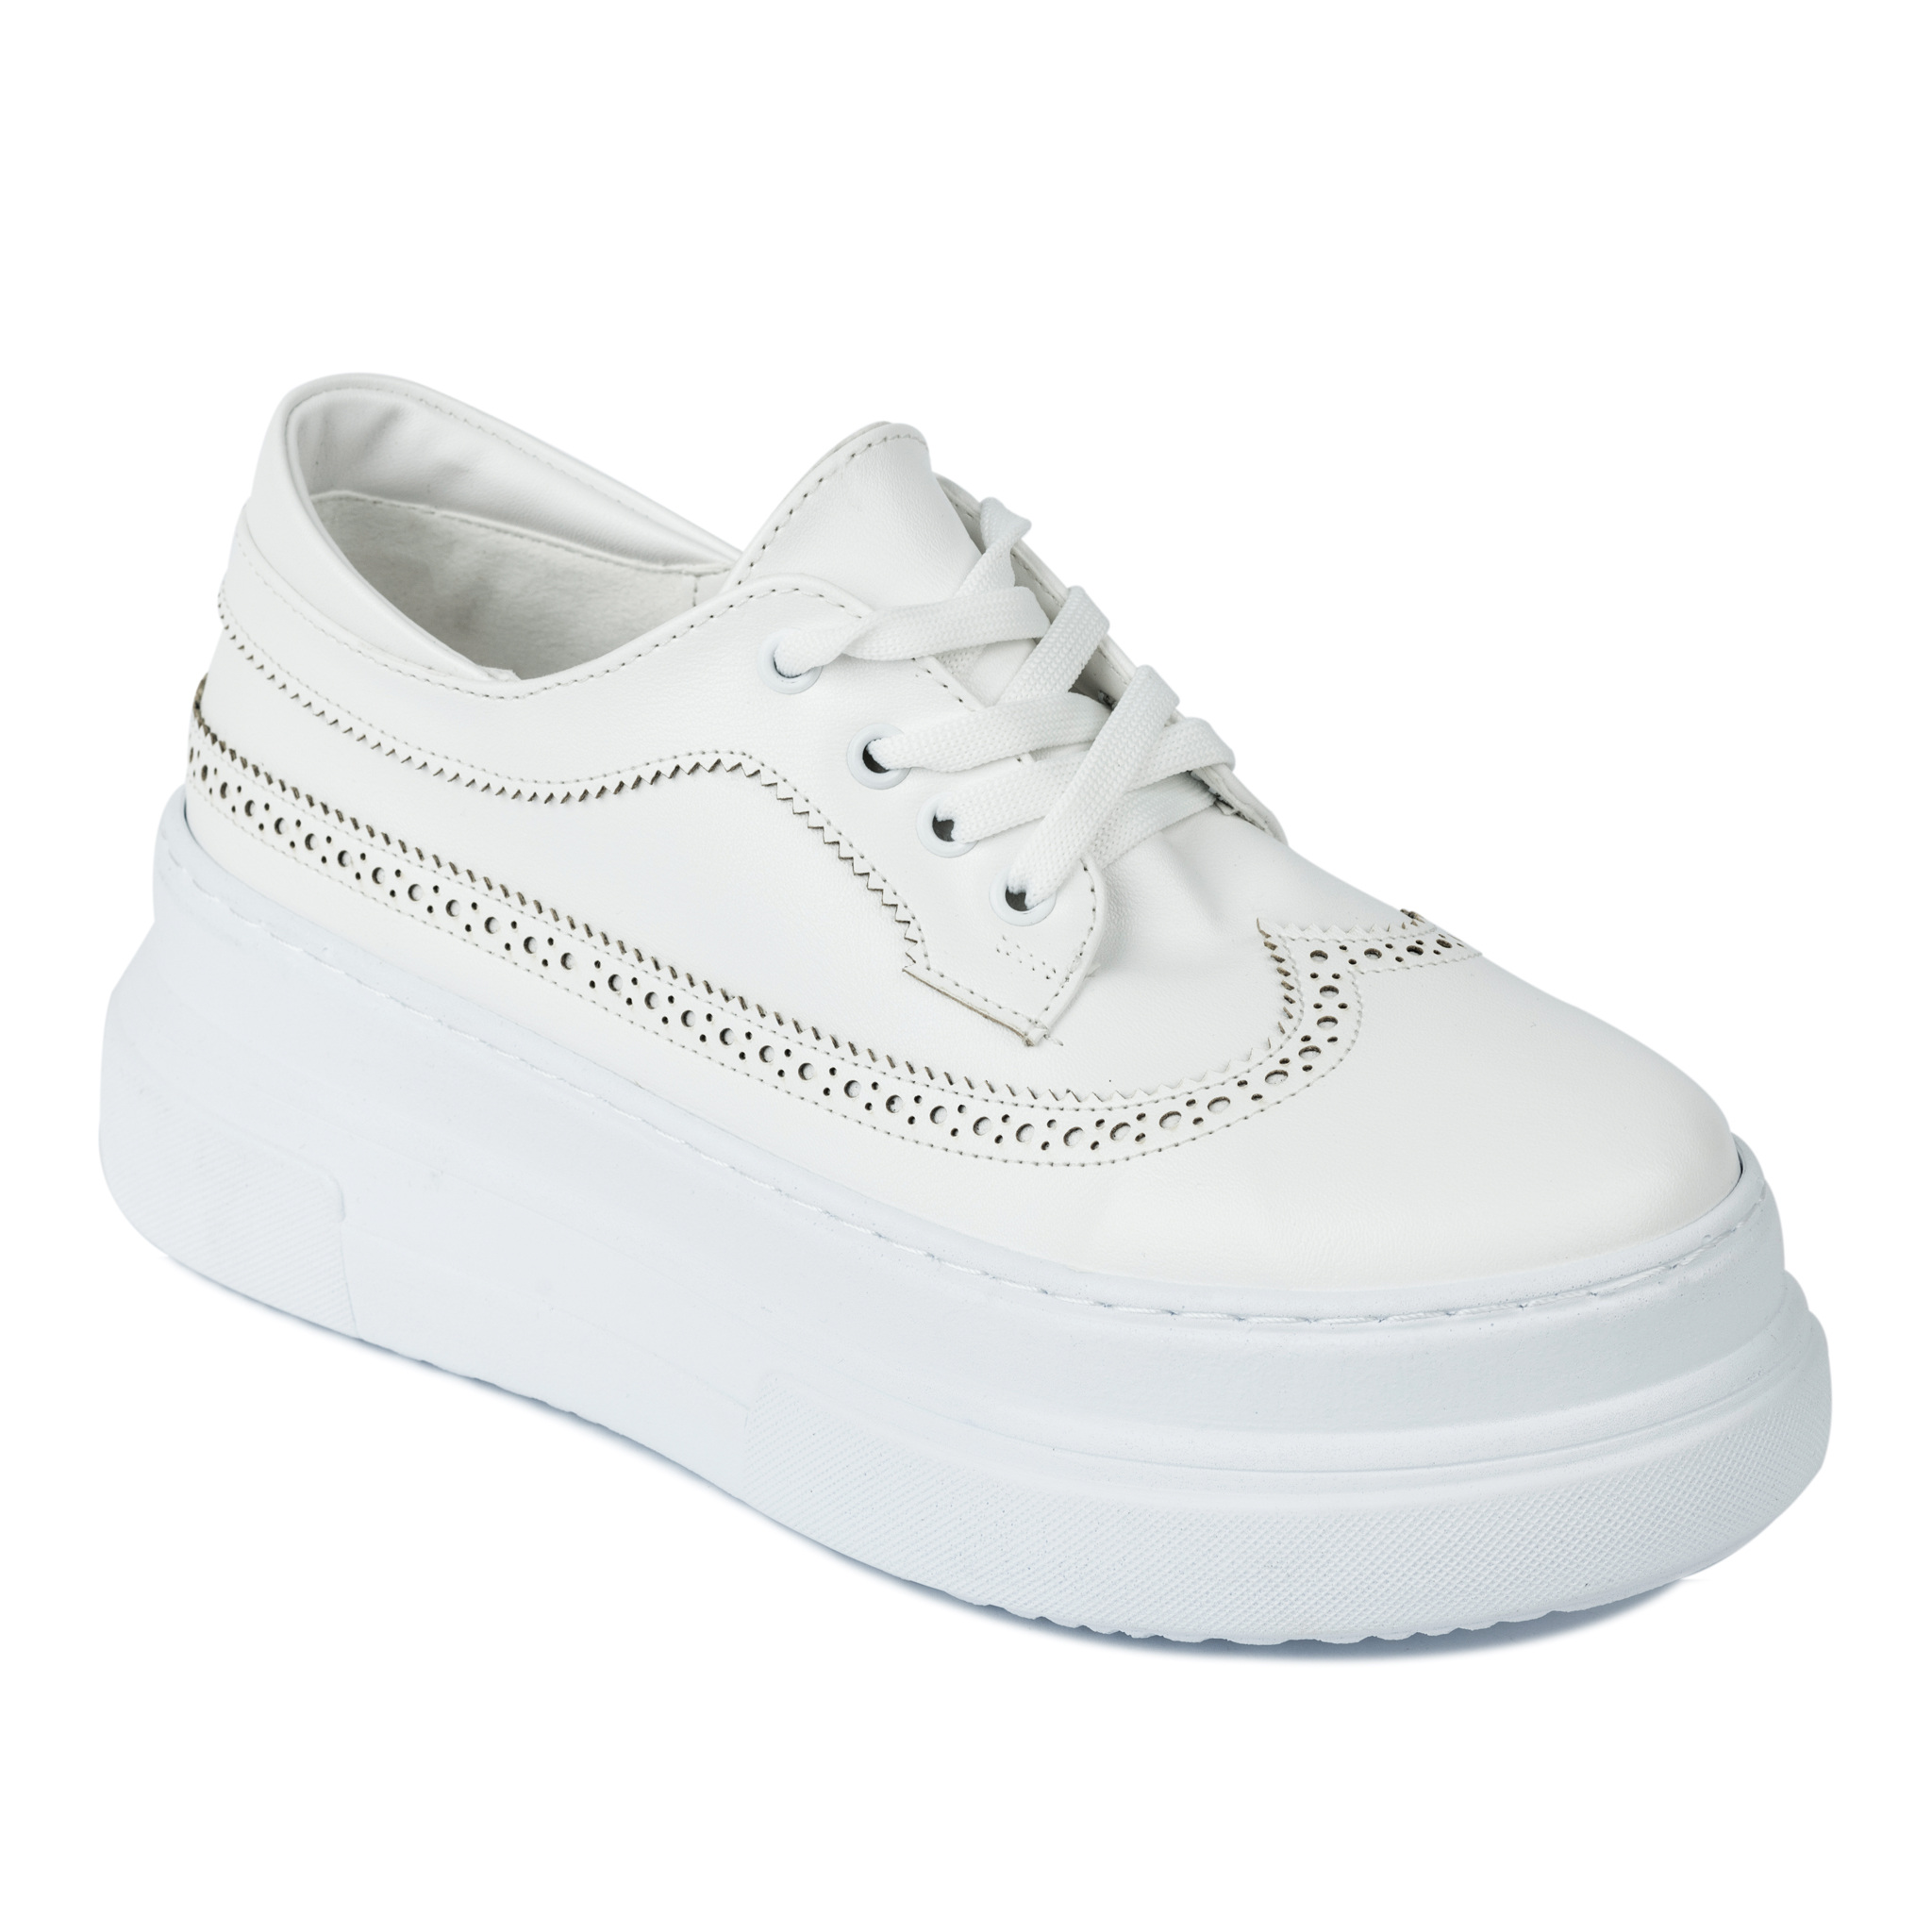 HIGH SOLE SHALLOW SHOES - WHITE